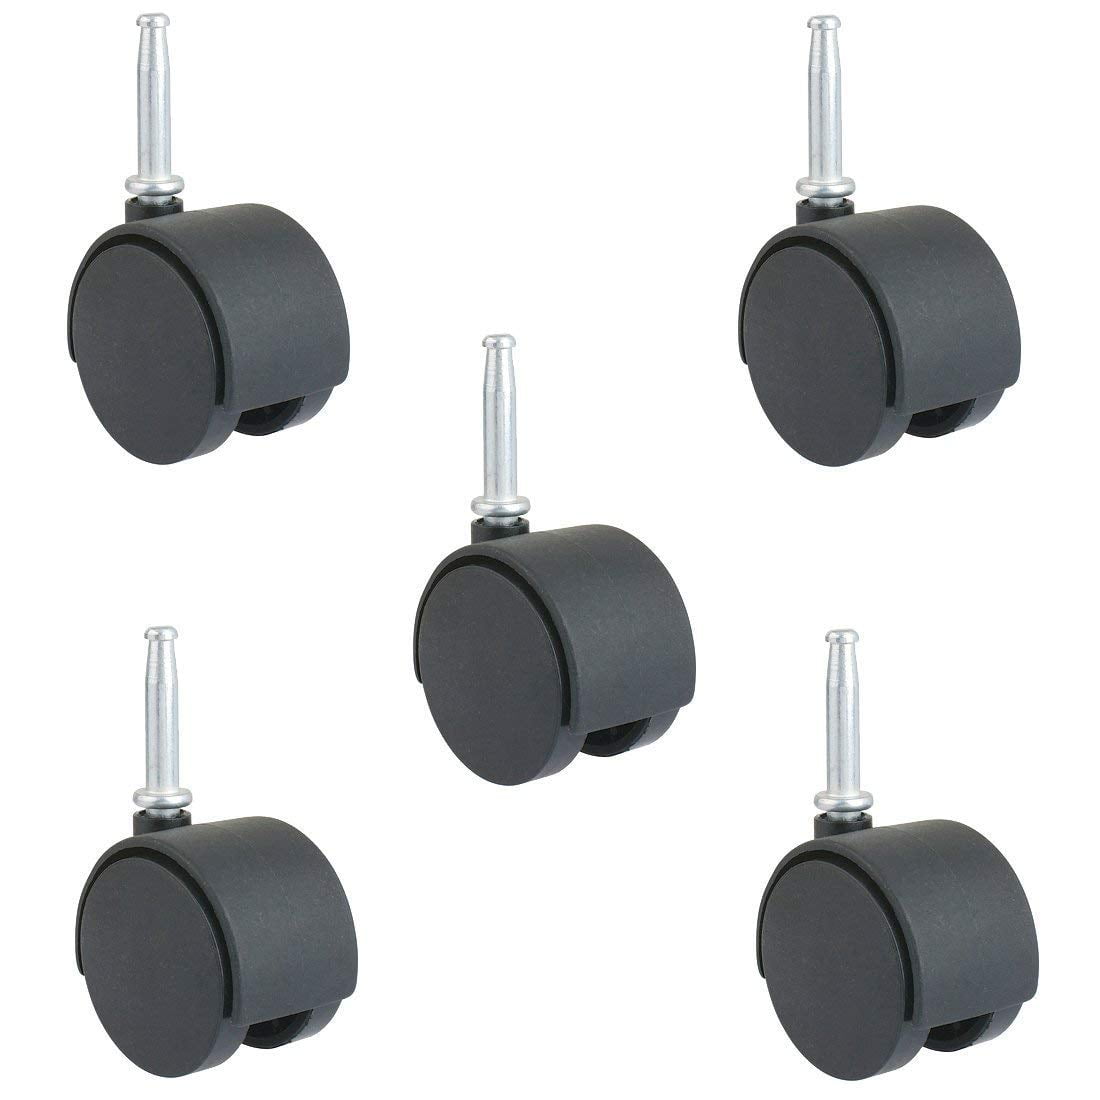 Set of 5 Plastic Casters 2" X 2"  with 7/16" X 1" Grip Stem 